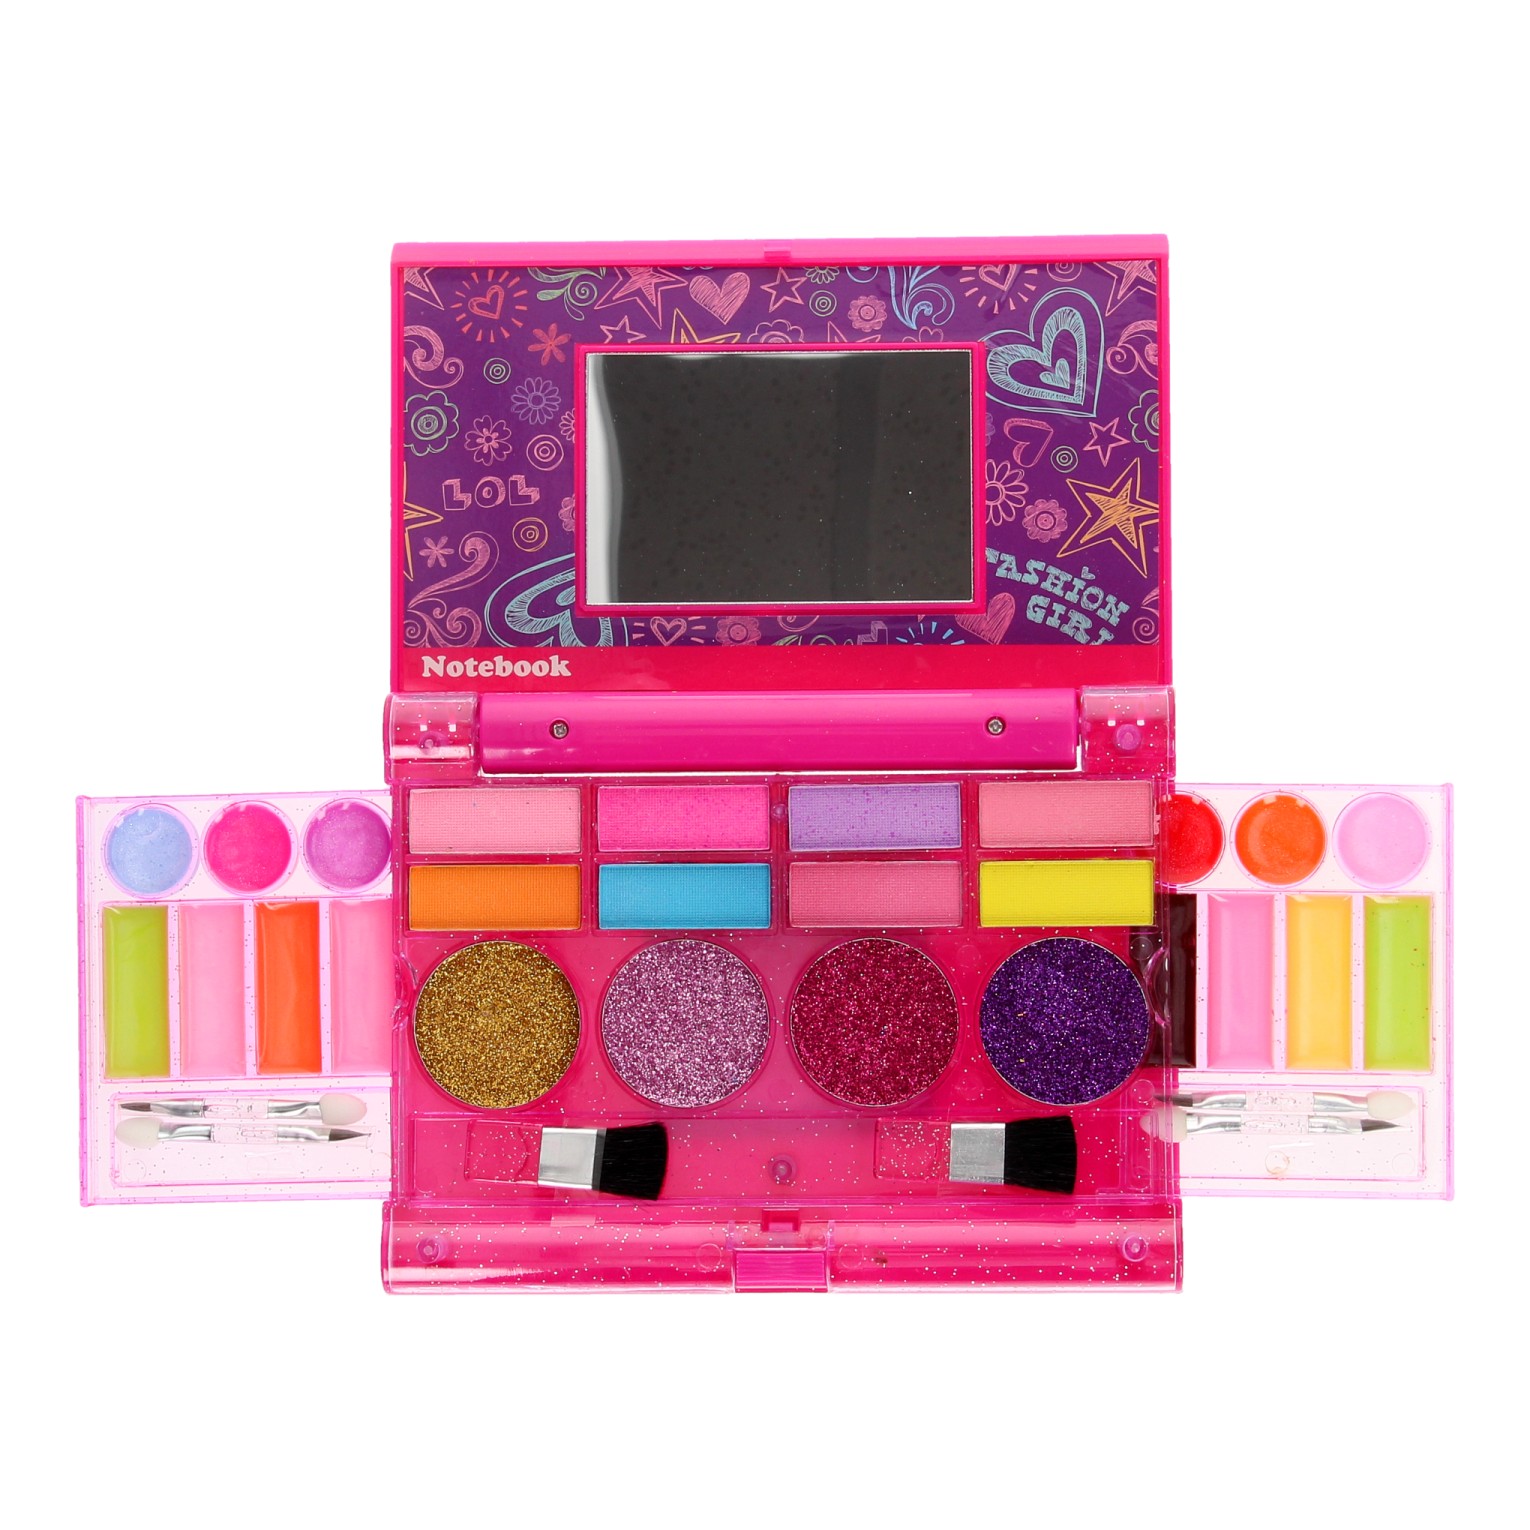 Make-up Set Deluxe